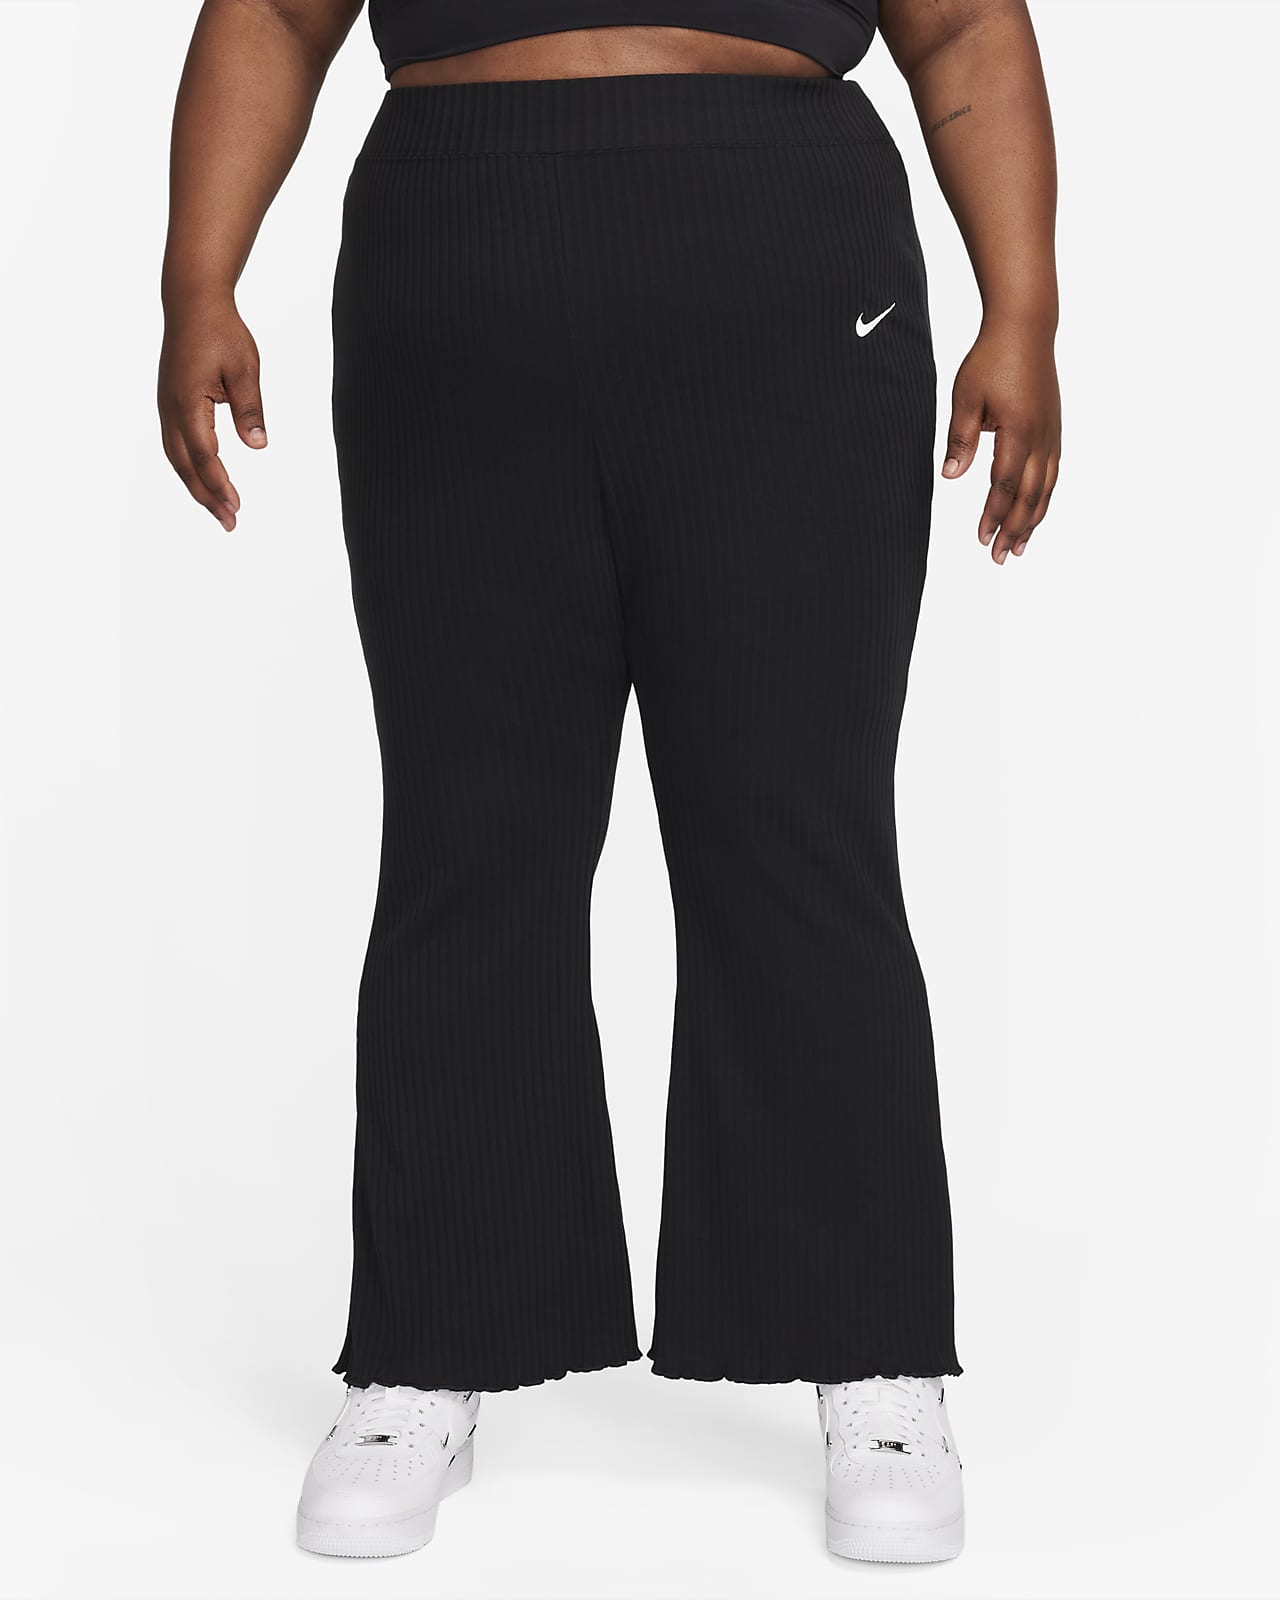 Nike Sportswear Women's High-Waisted Ribbed Jersey Trousers (Plus Size)